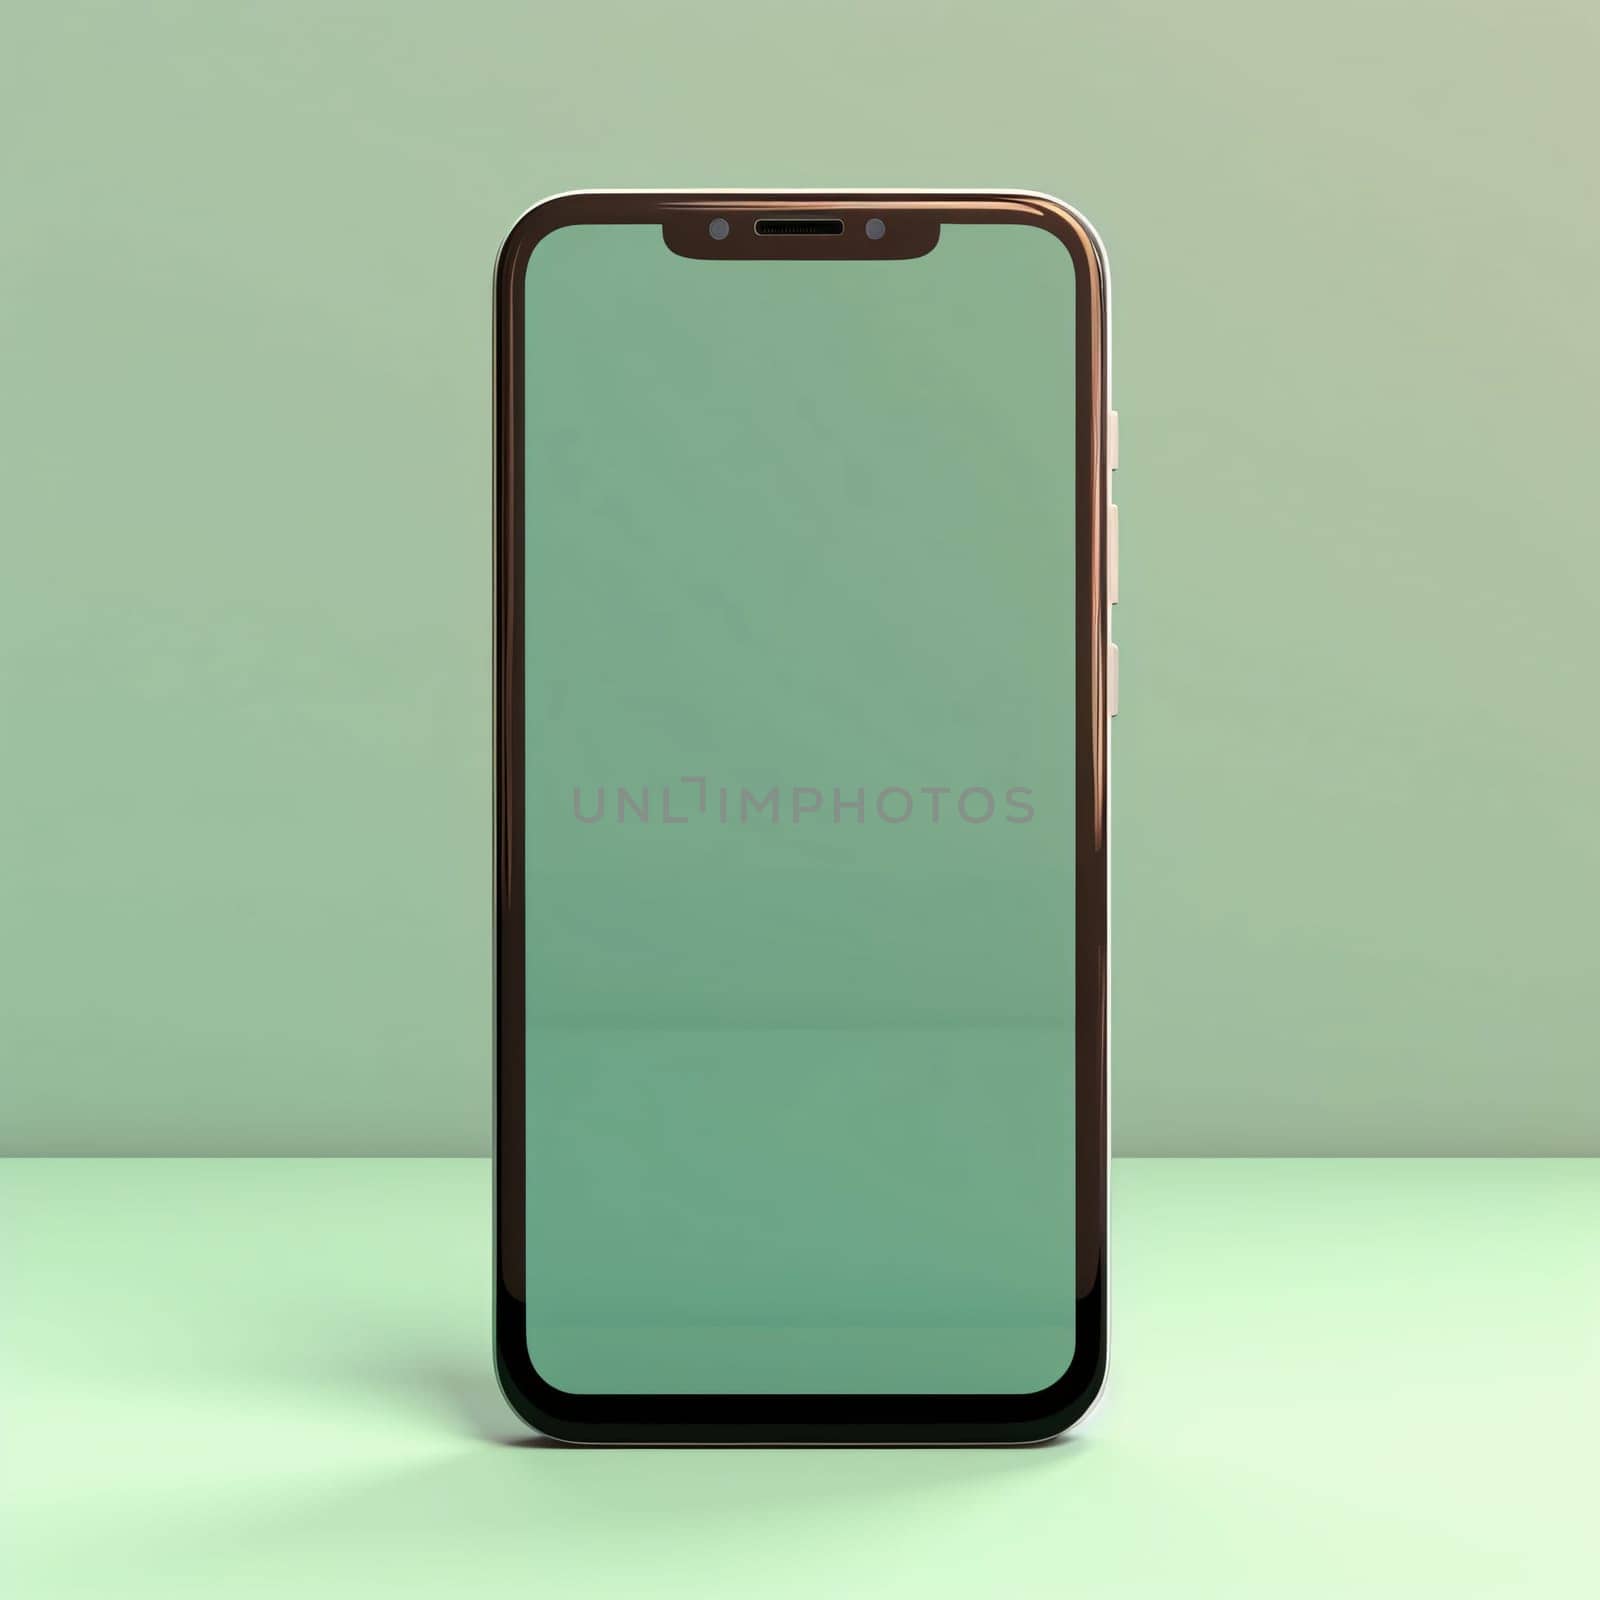 Smartphone screen: Smartphone with blank screen on green background. 3D rendering.